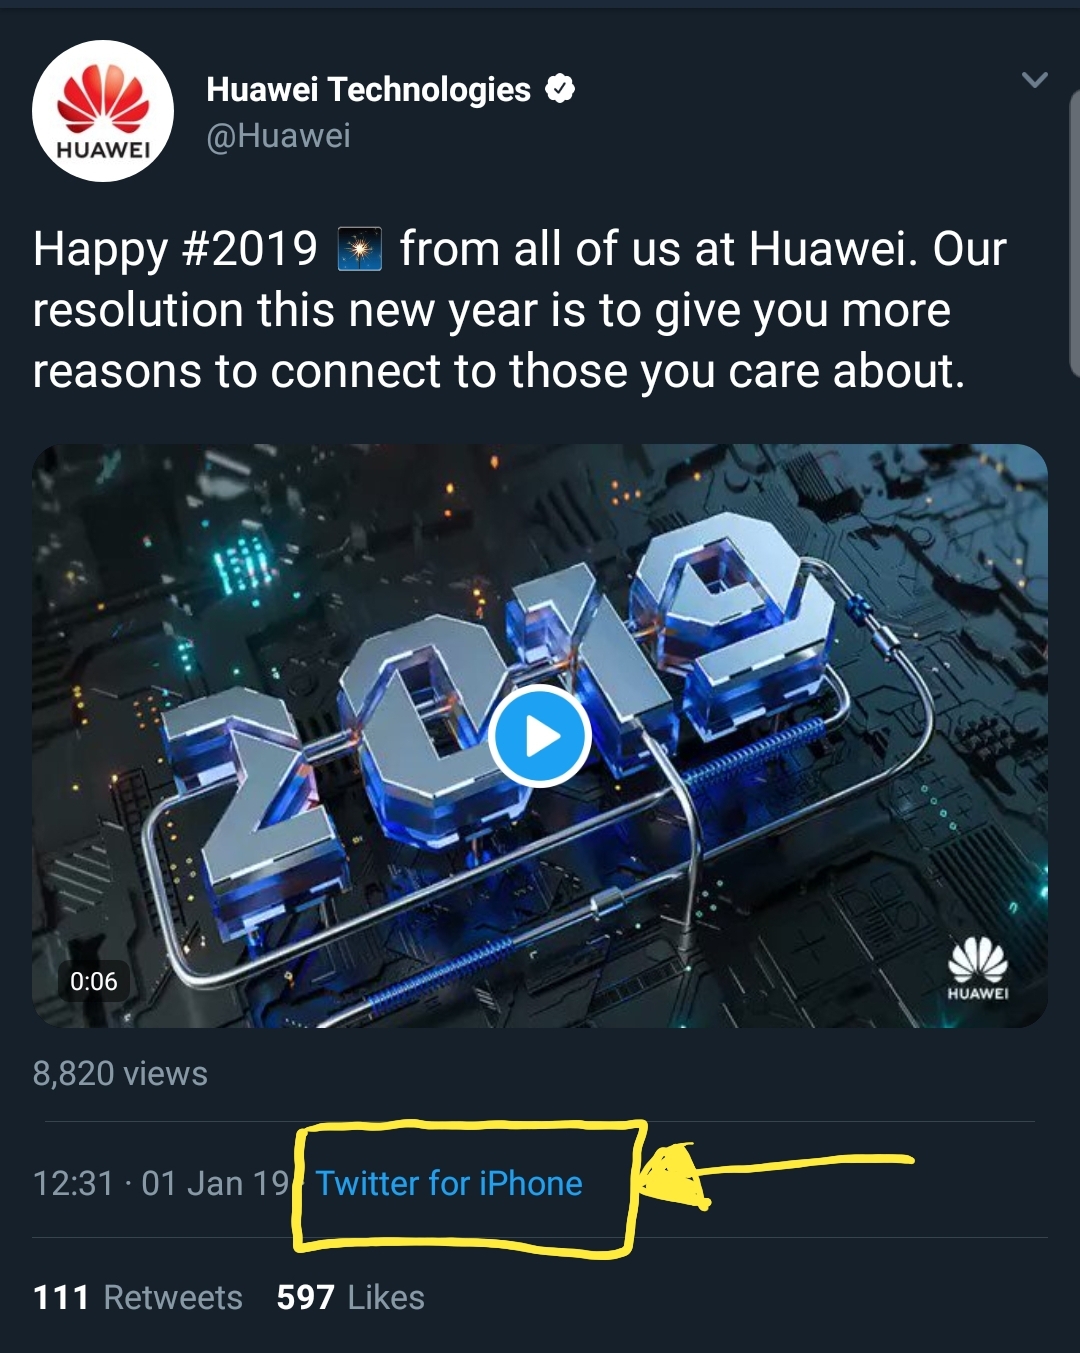 Huawei S Official Twitter Account Just Posted A Tweet Using An Iphone